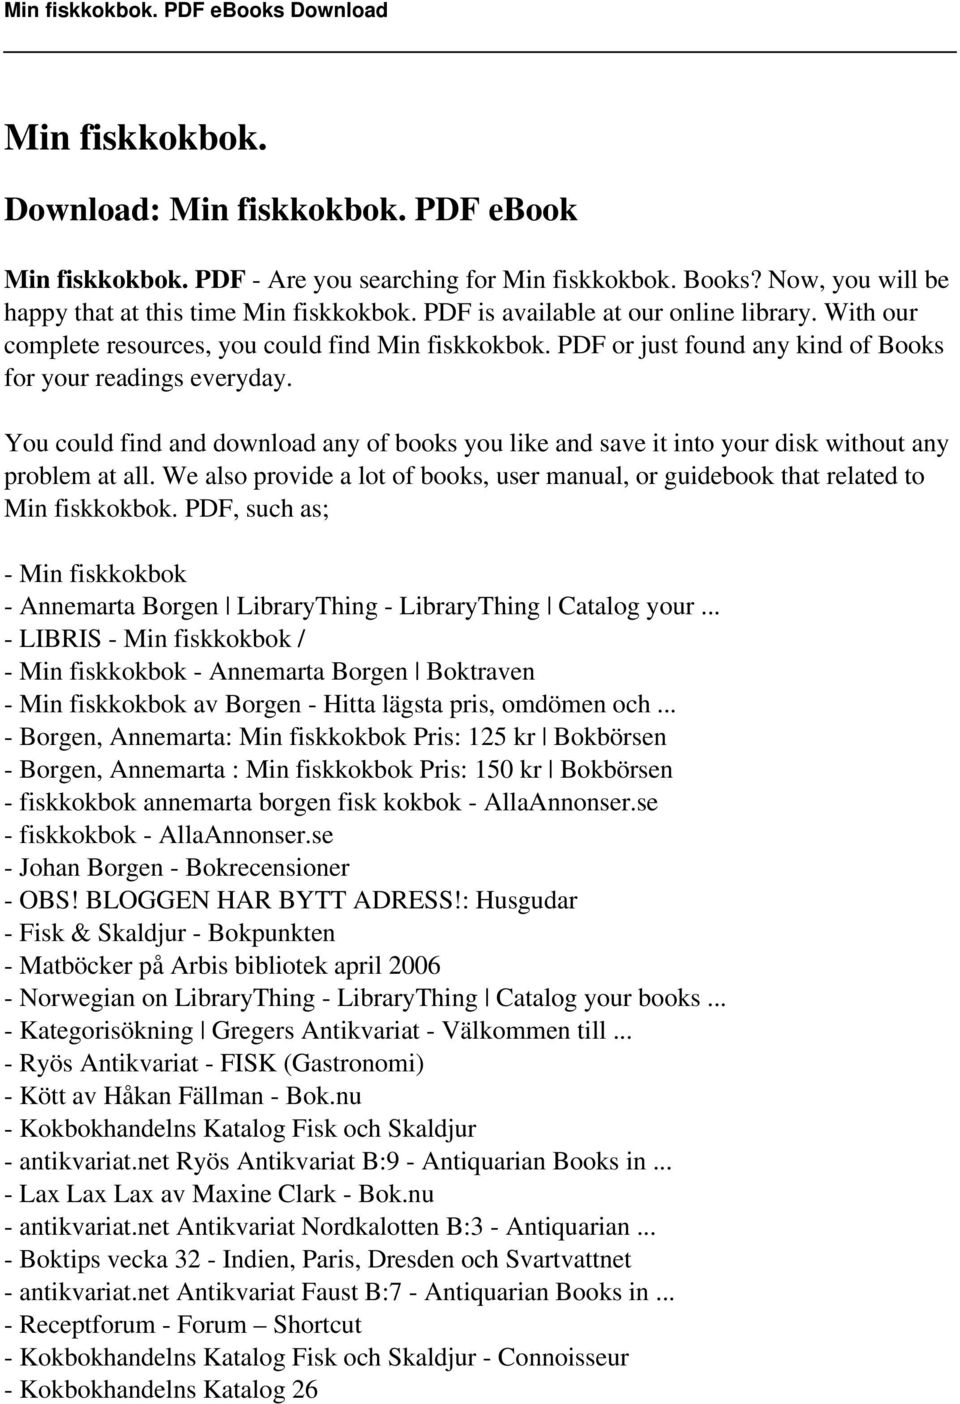 You could find and download any of books you like and save it into your disk without any problem at all. We also provide a lot of books, user manual, or guidebook that related to Min fiskkokbok.